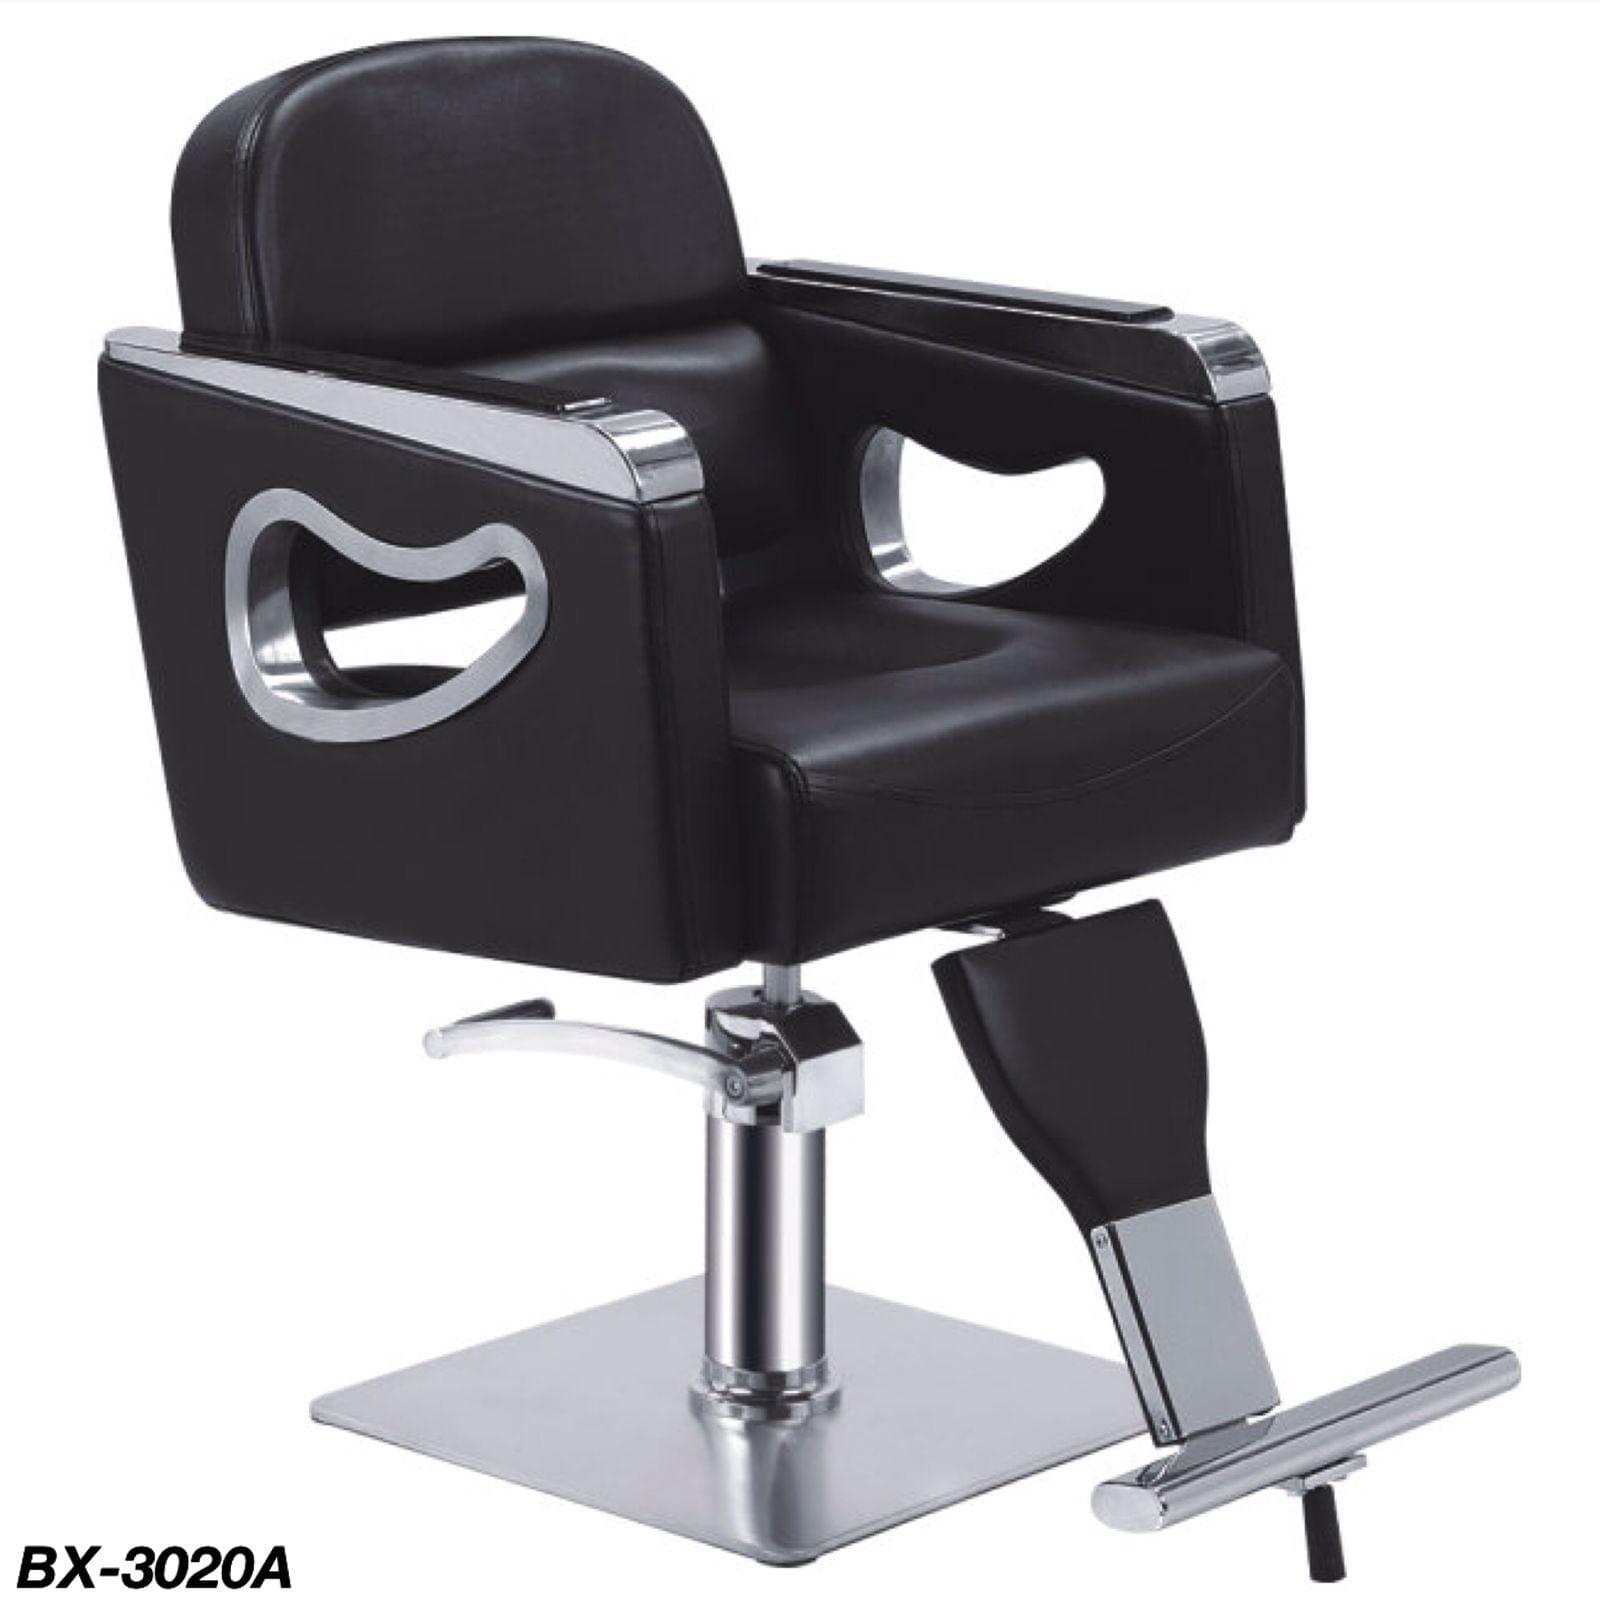 Globalstar Professional Ladies Styling Chair BX-3020A